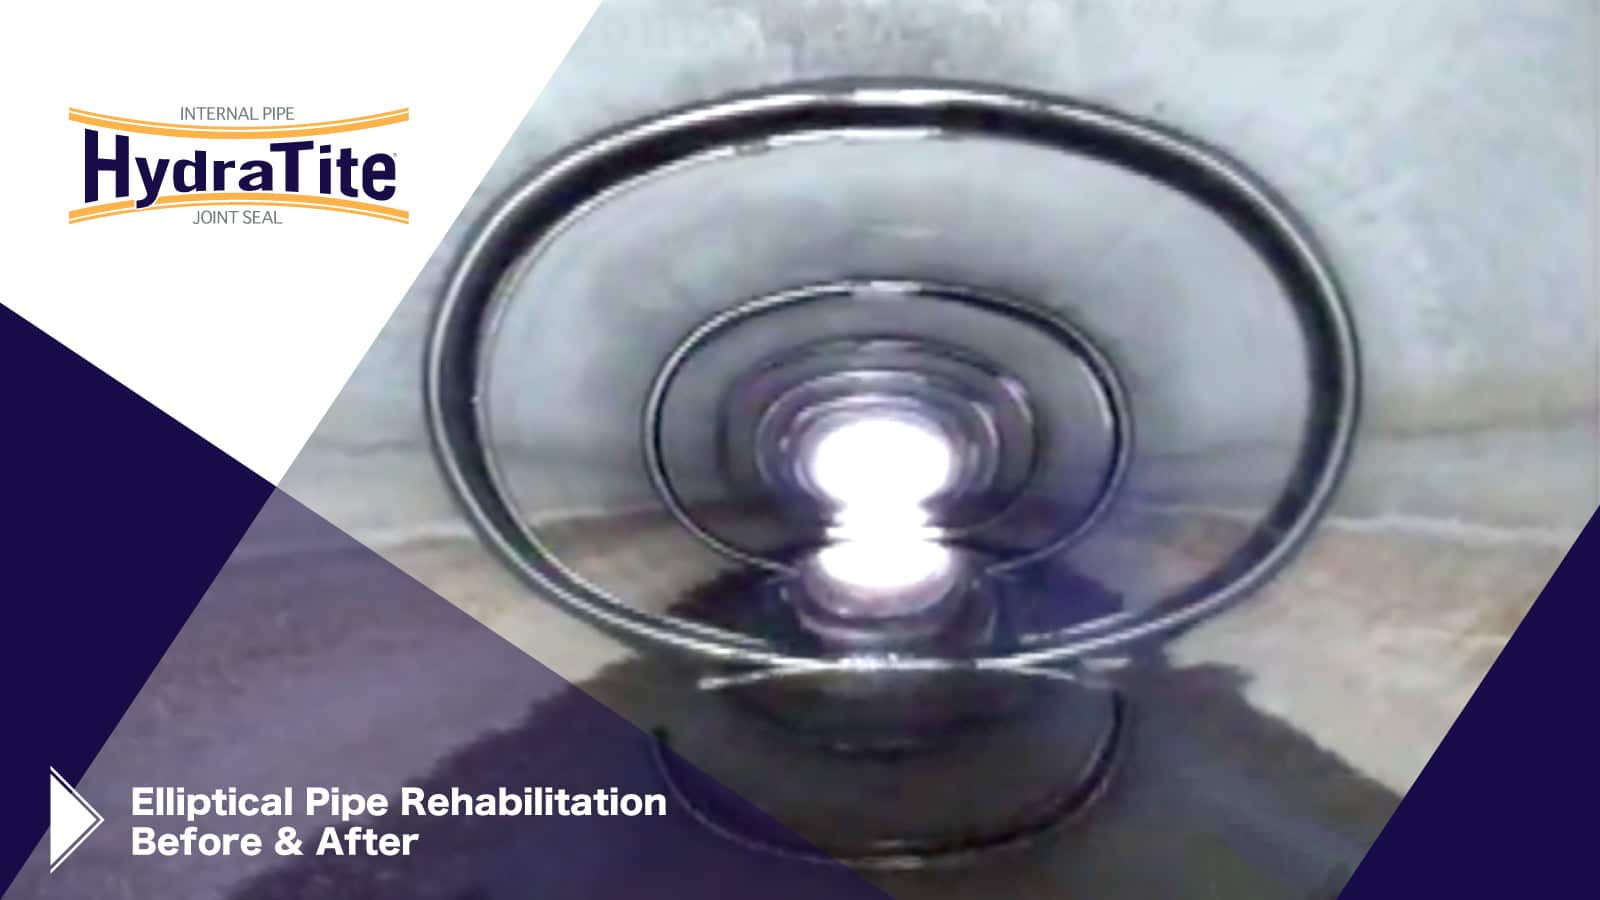 Inside an elliptical pipe where the joints have been sealed with HydraTite, 'Elliptical Pipe Rehabilitation Before & After'